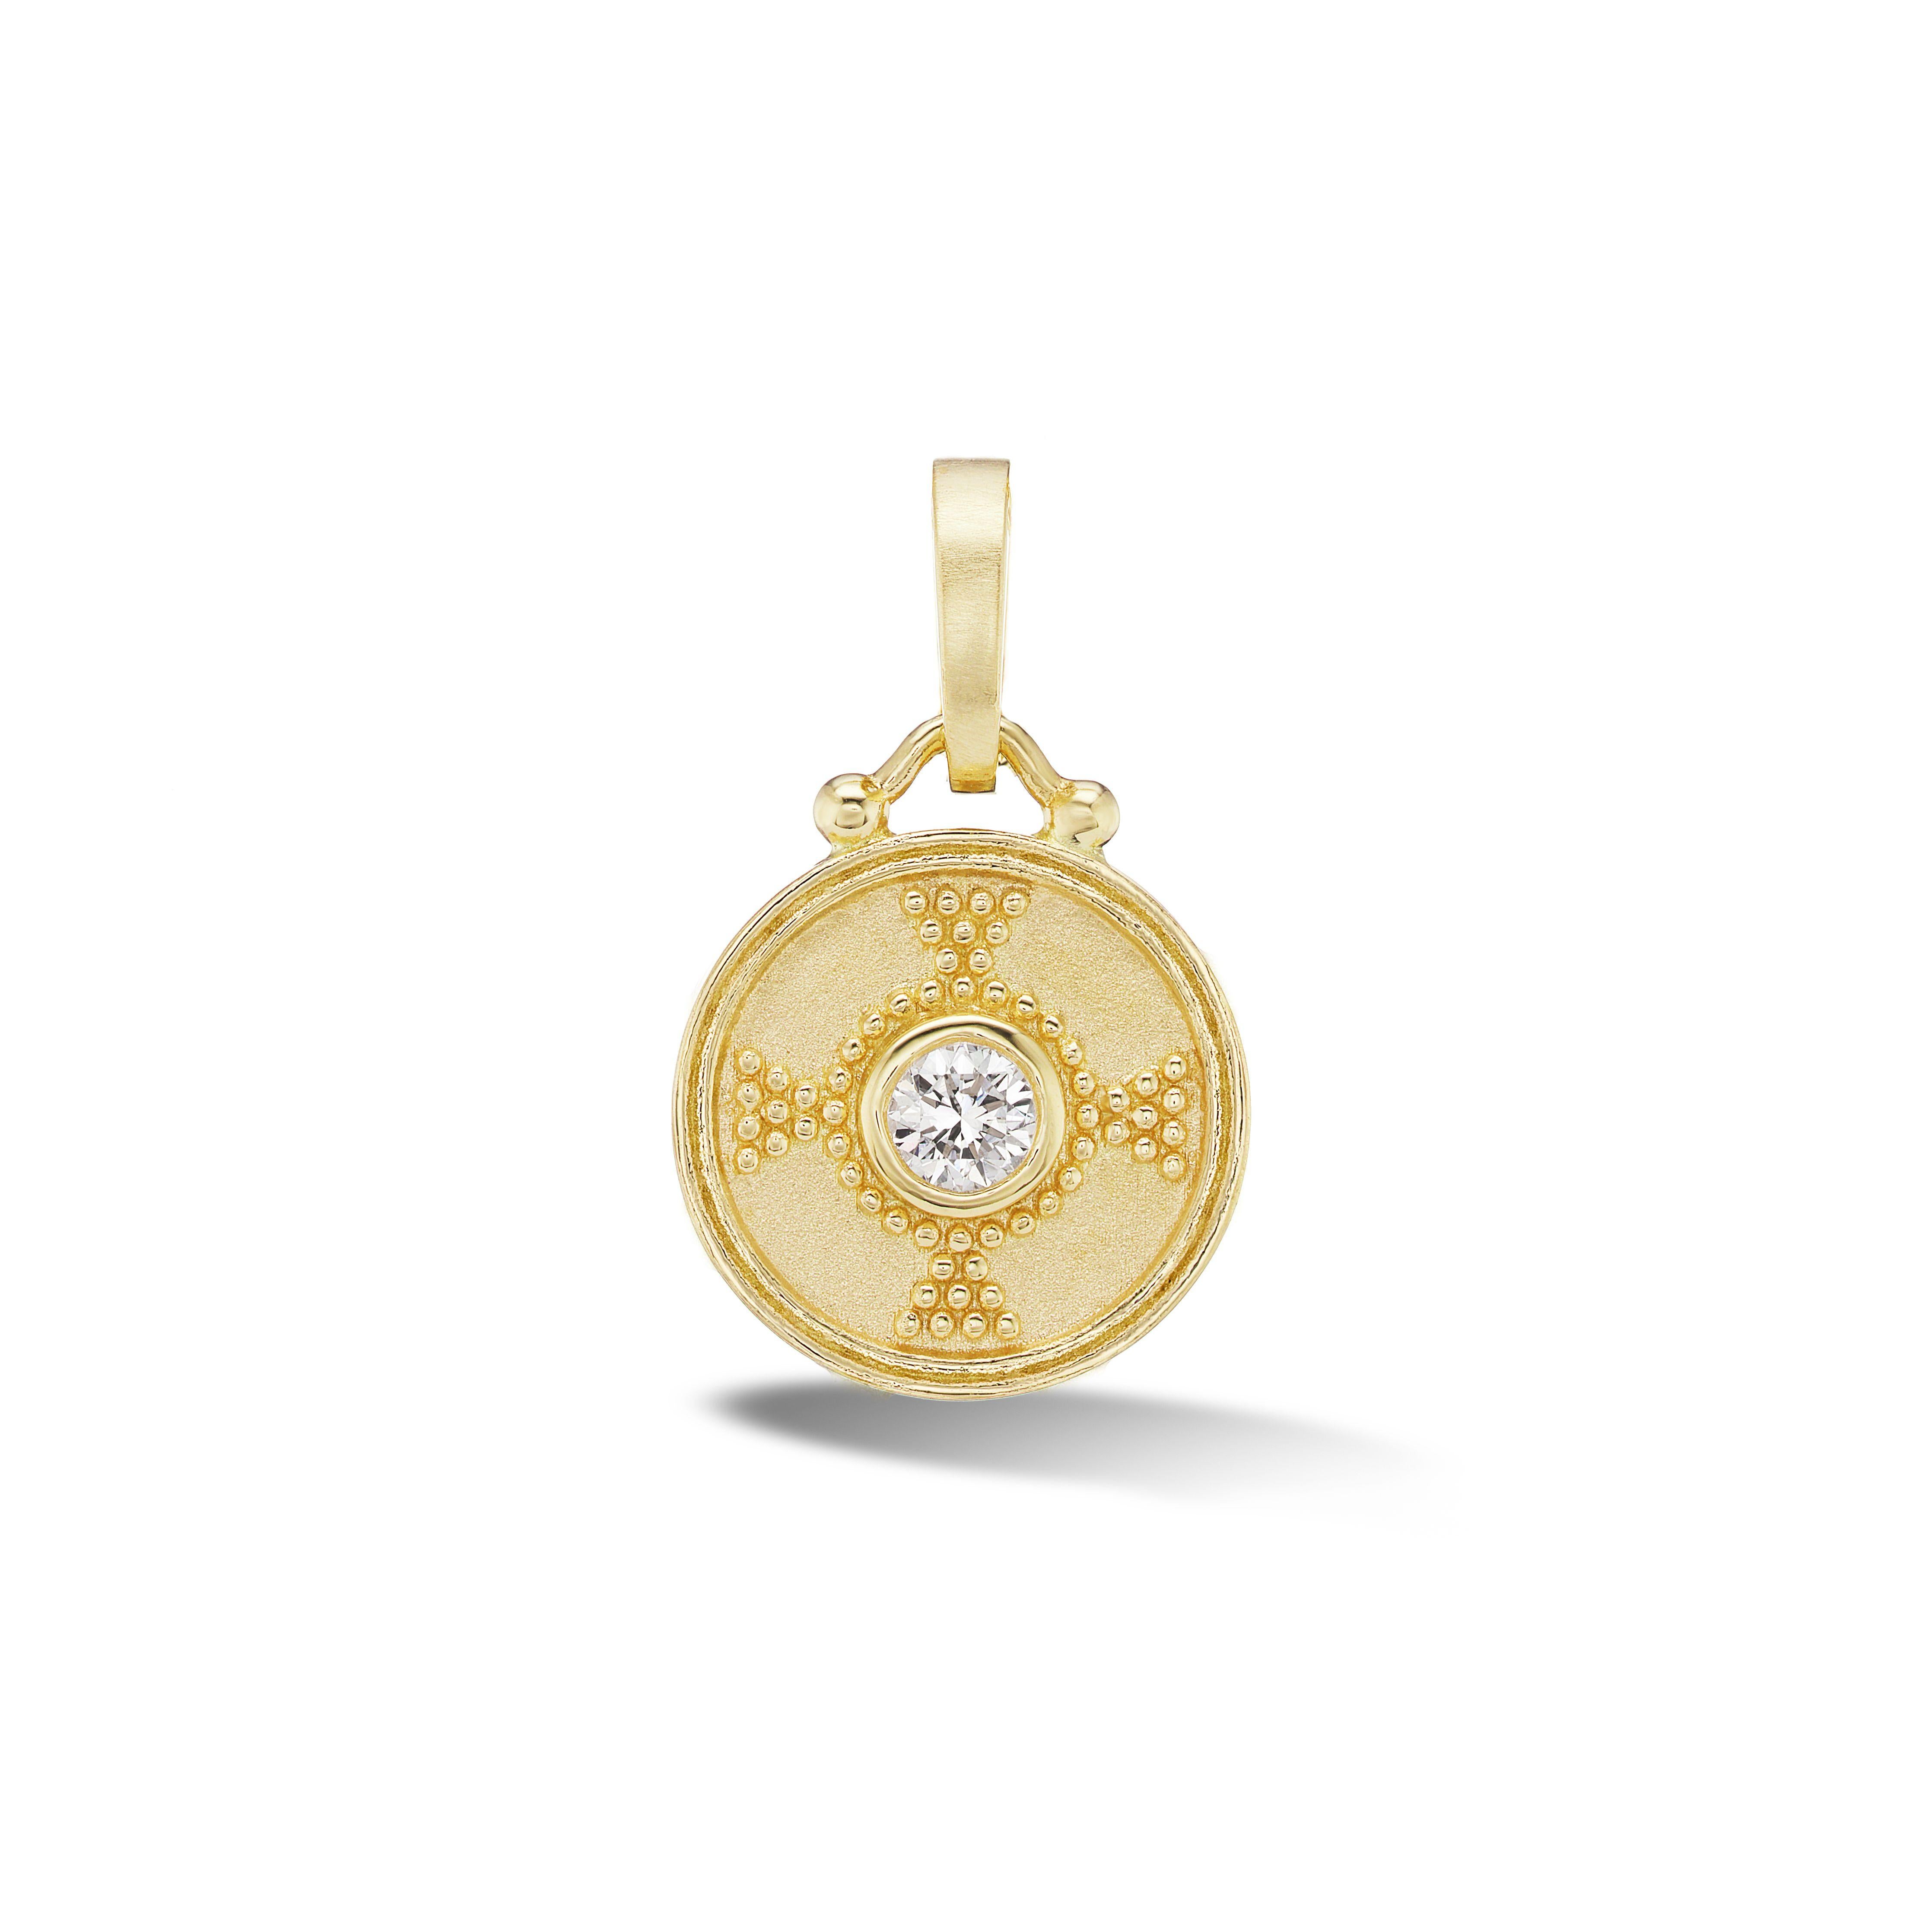 Drawn from antiquity, this charm is named for the Latin word for granulation, an ancient technique where the surface of a jewel is decorated with small golden spheres. This charm features a diamond framed by a granulated pyramid pattern, and is